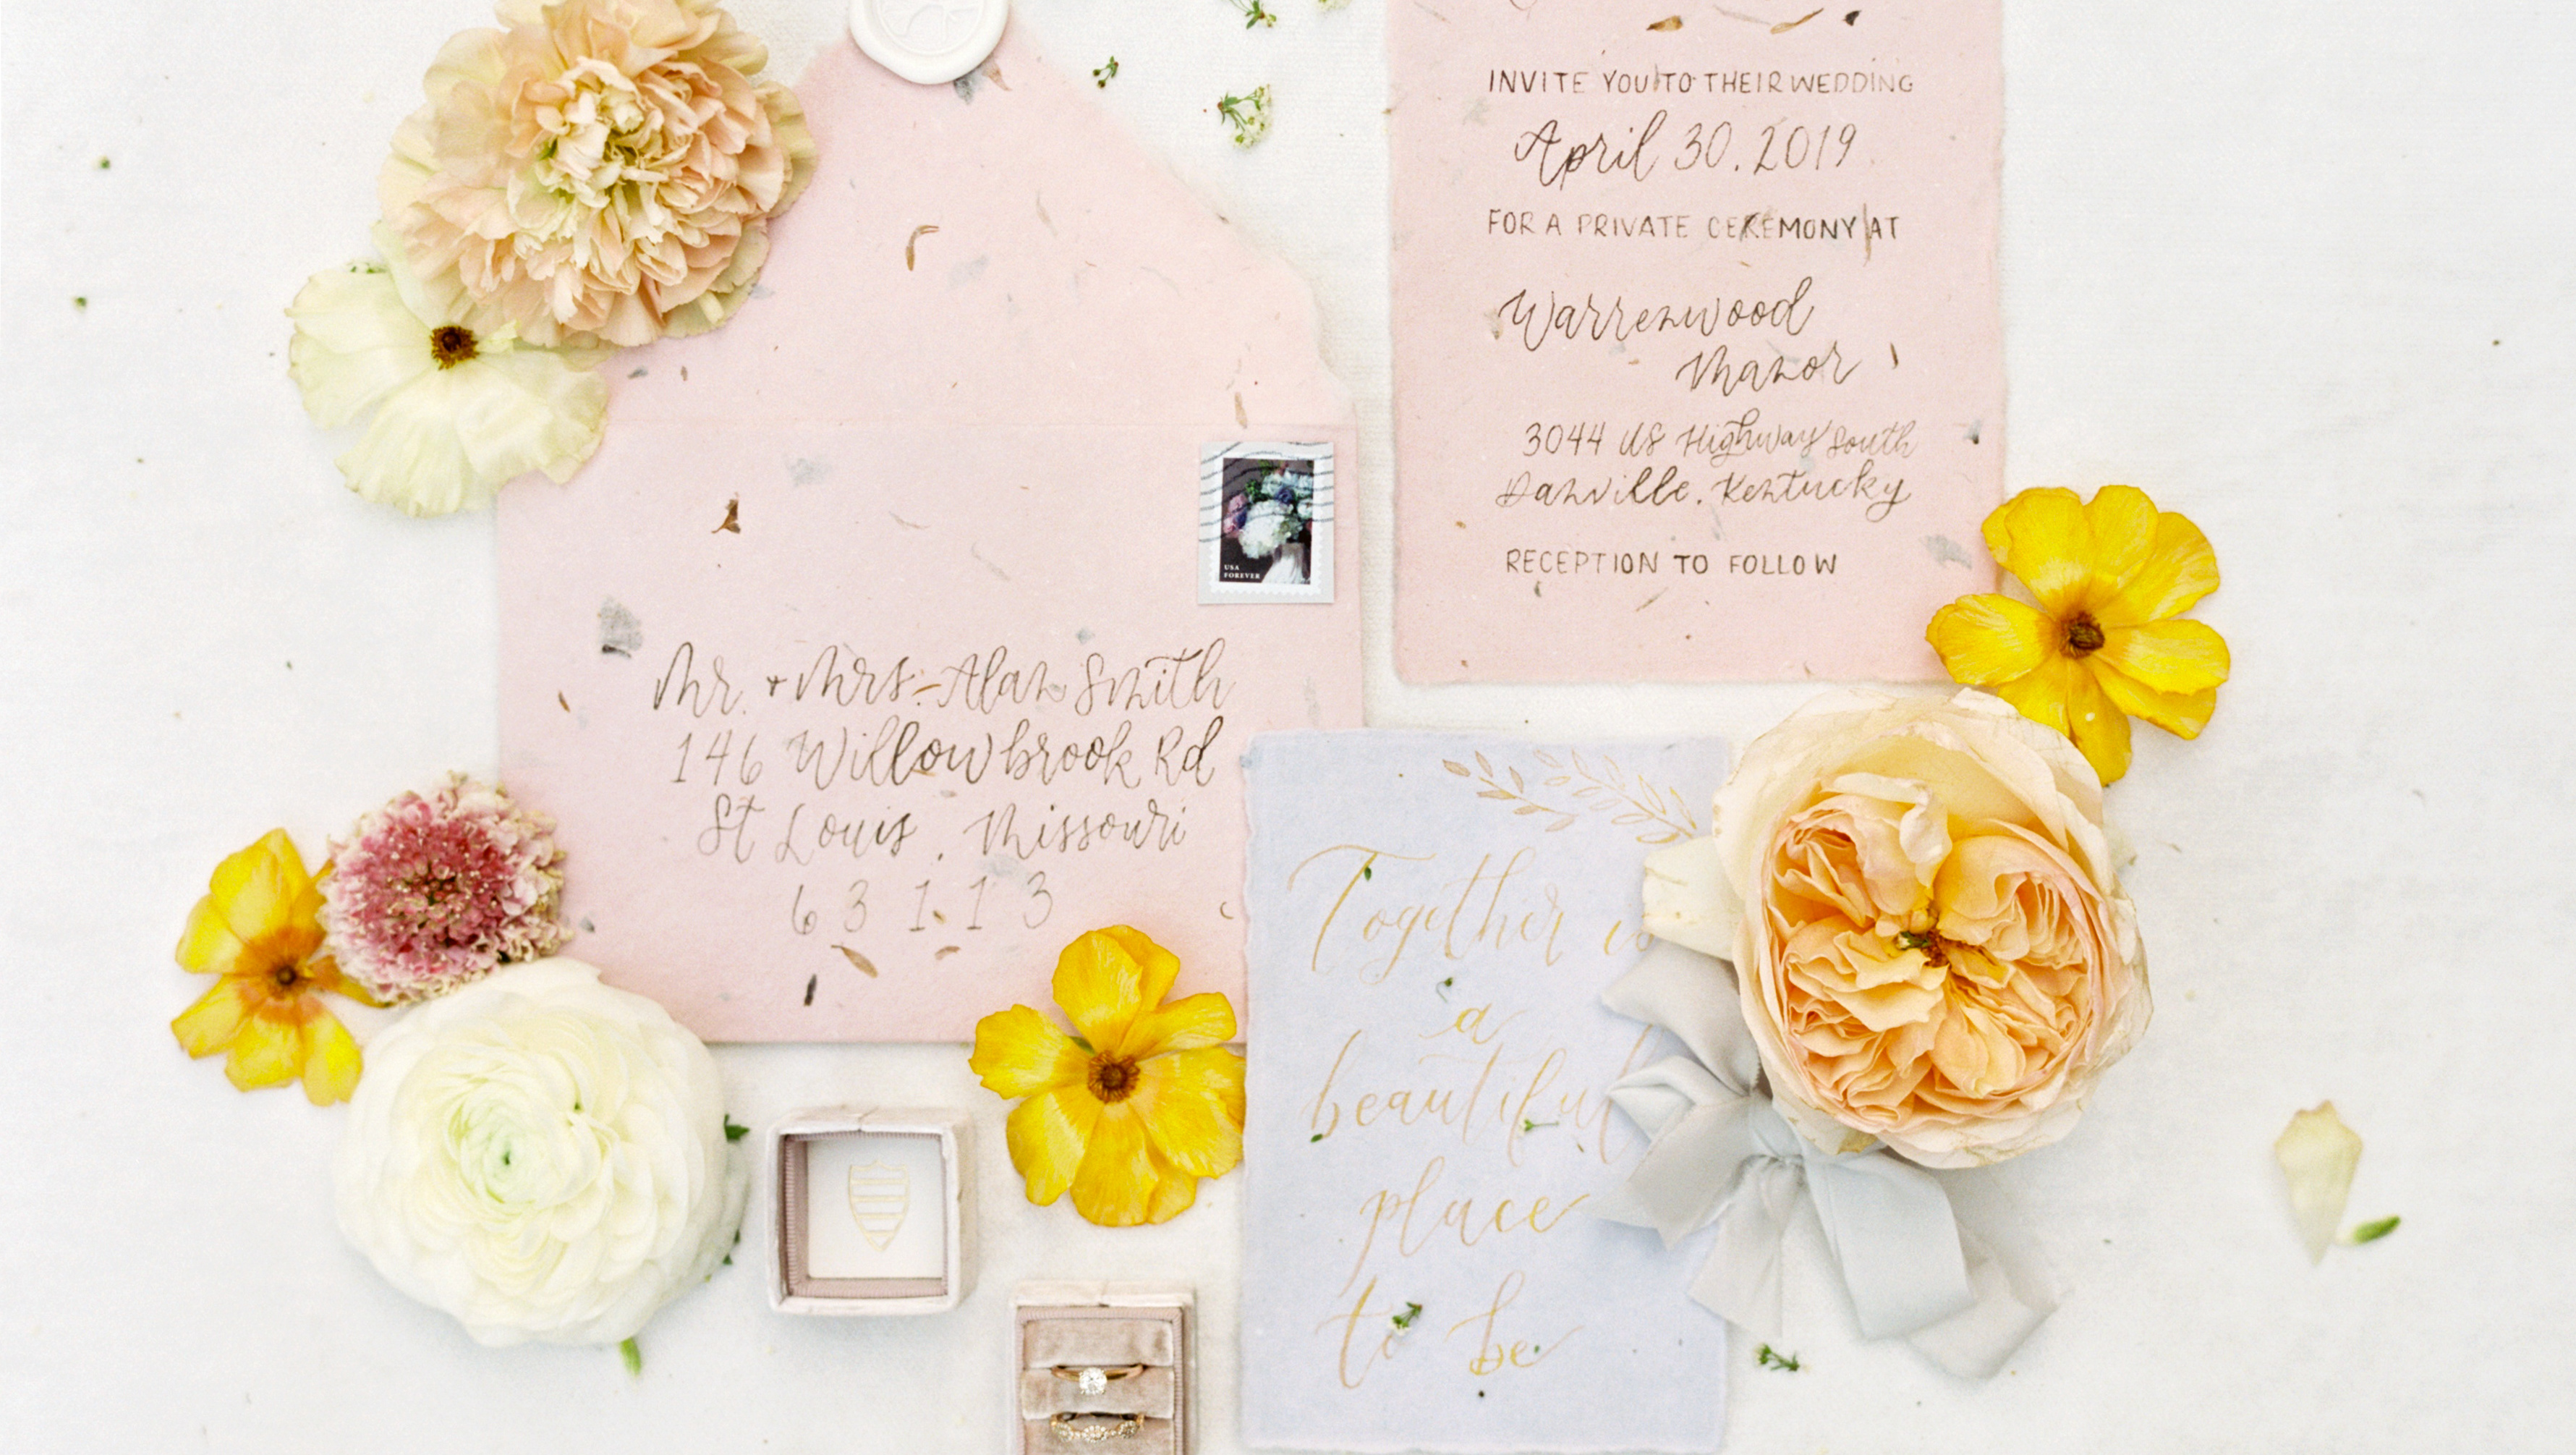 How to Make the Perfect Wedding Guest List, Fine Art Wedding Invitations, photo by Kelli Lynn Photography